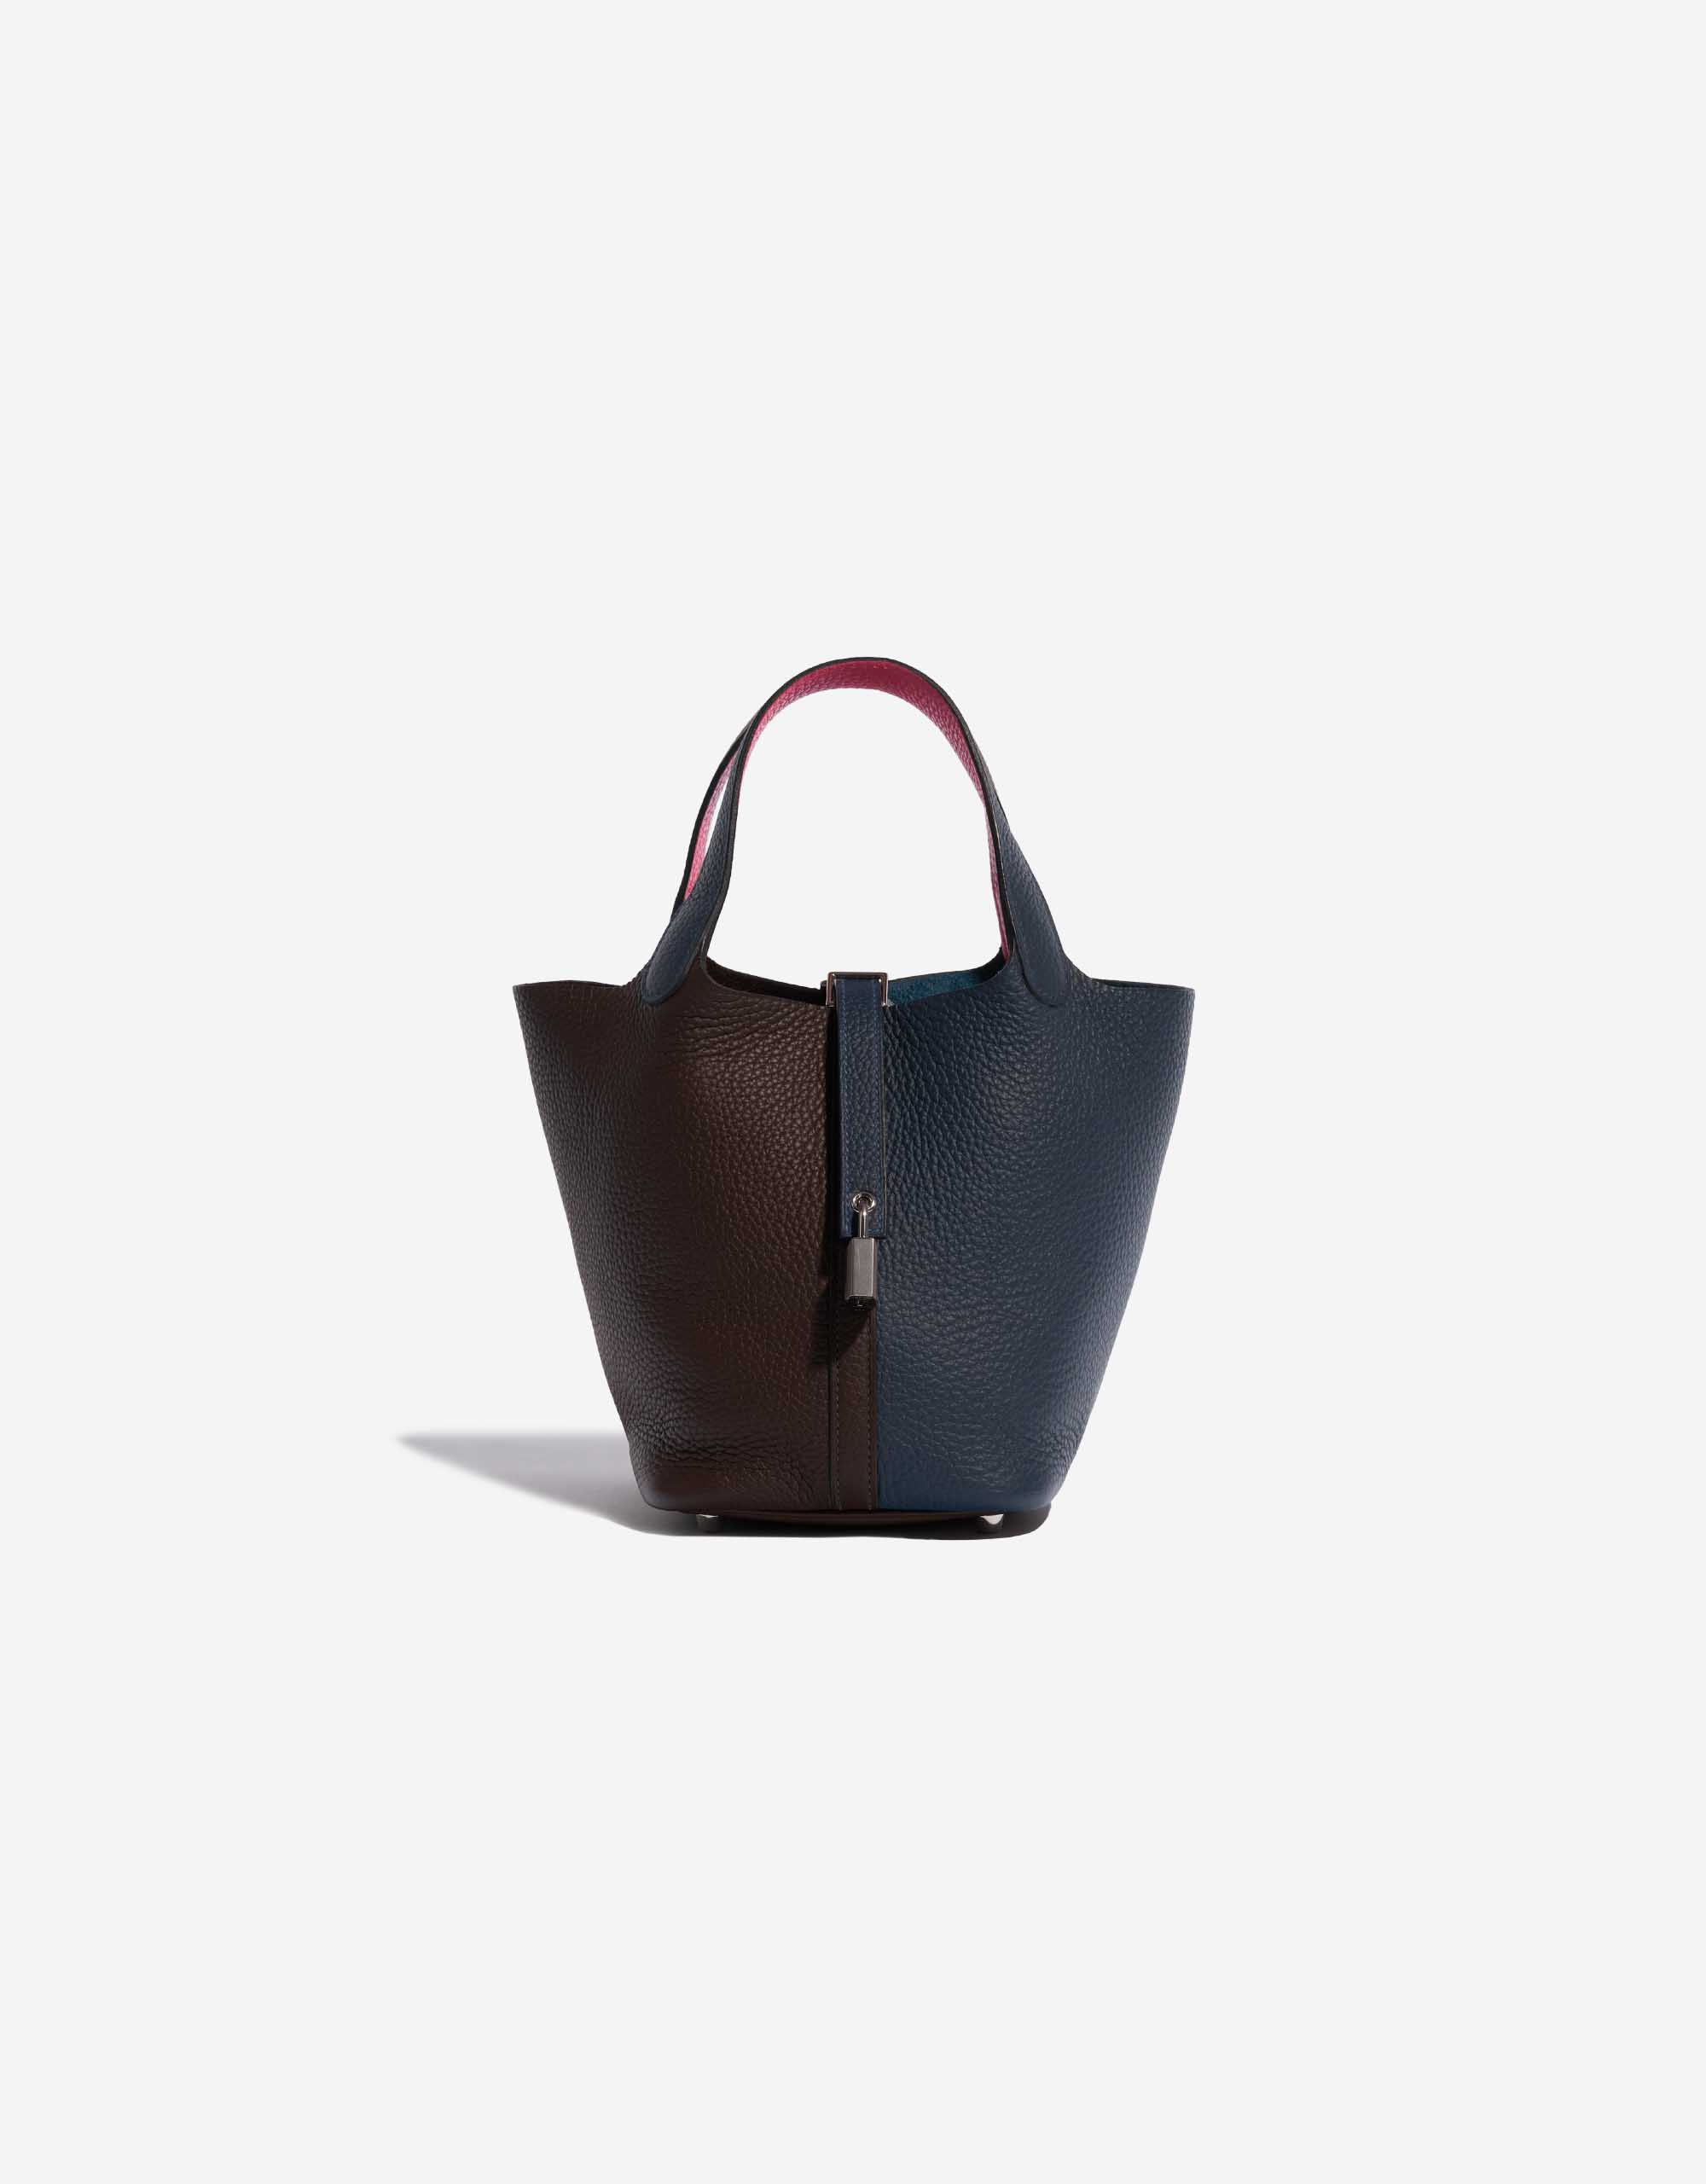 Picotin leather tote Hermès Burgundy in Leather - 17444259